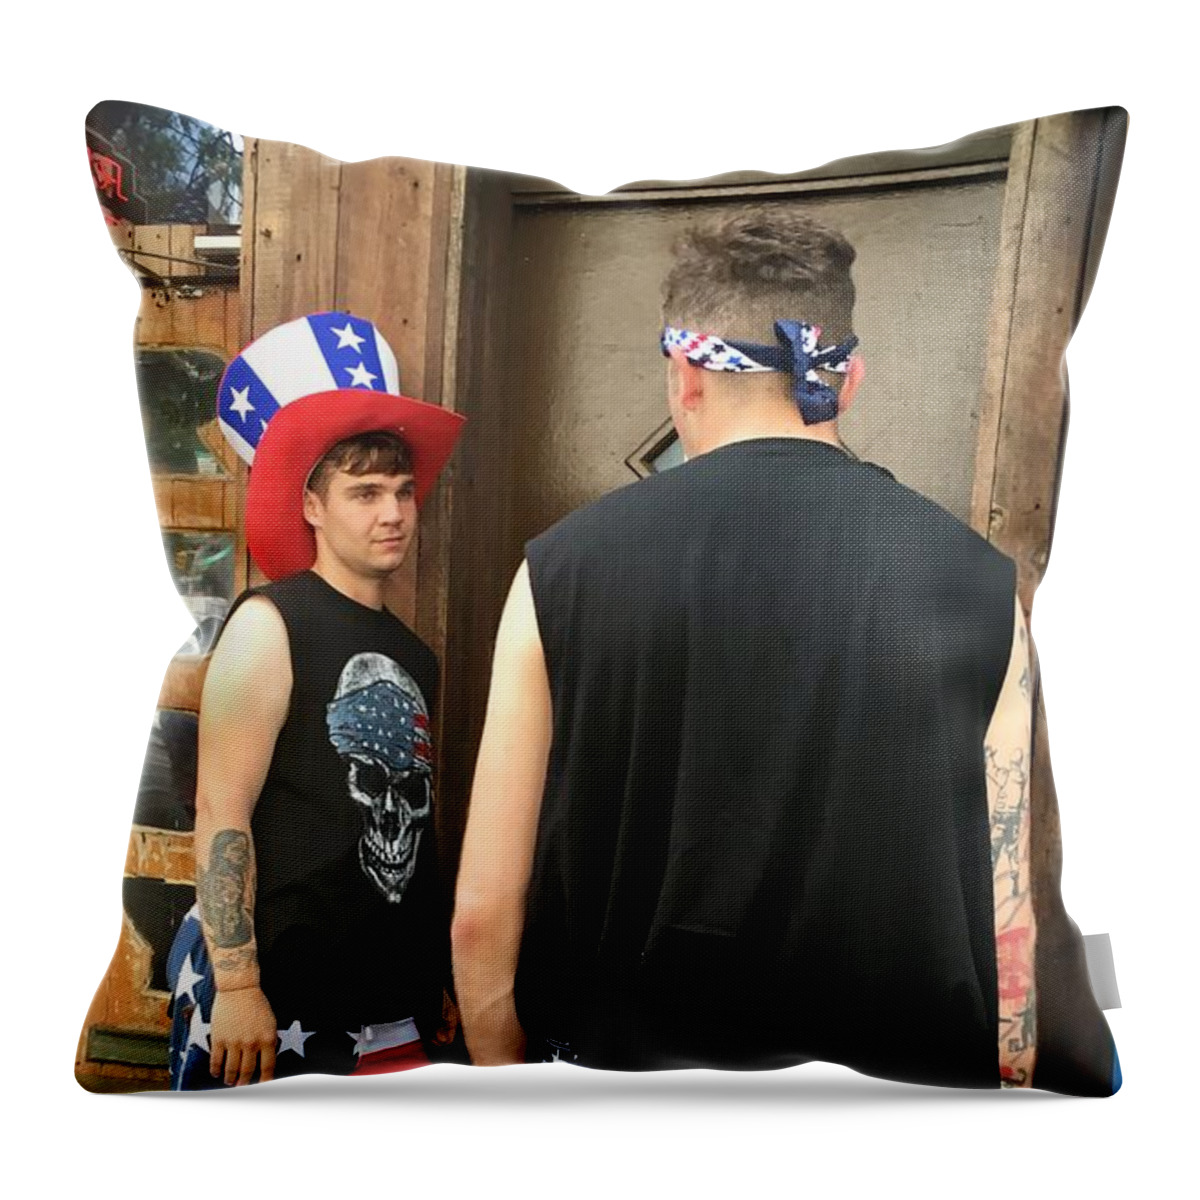 Patriotic Throw Pillow featuring the photograph American Boy by Joan Reese